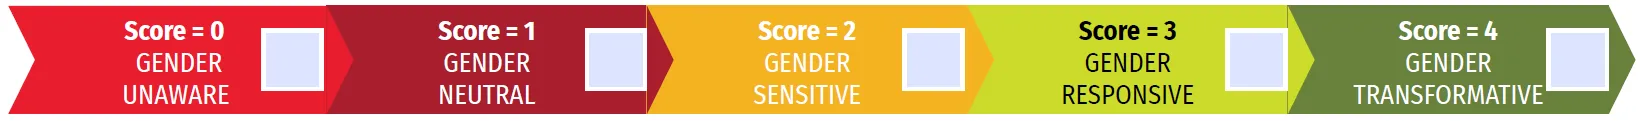 The Gender Marker scoring bar, ranking programs on a scale from 